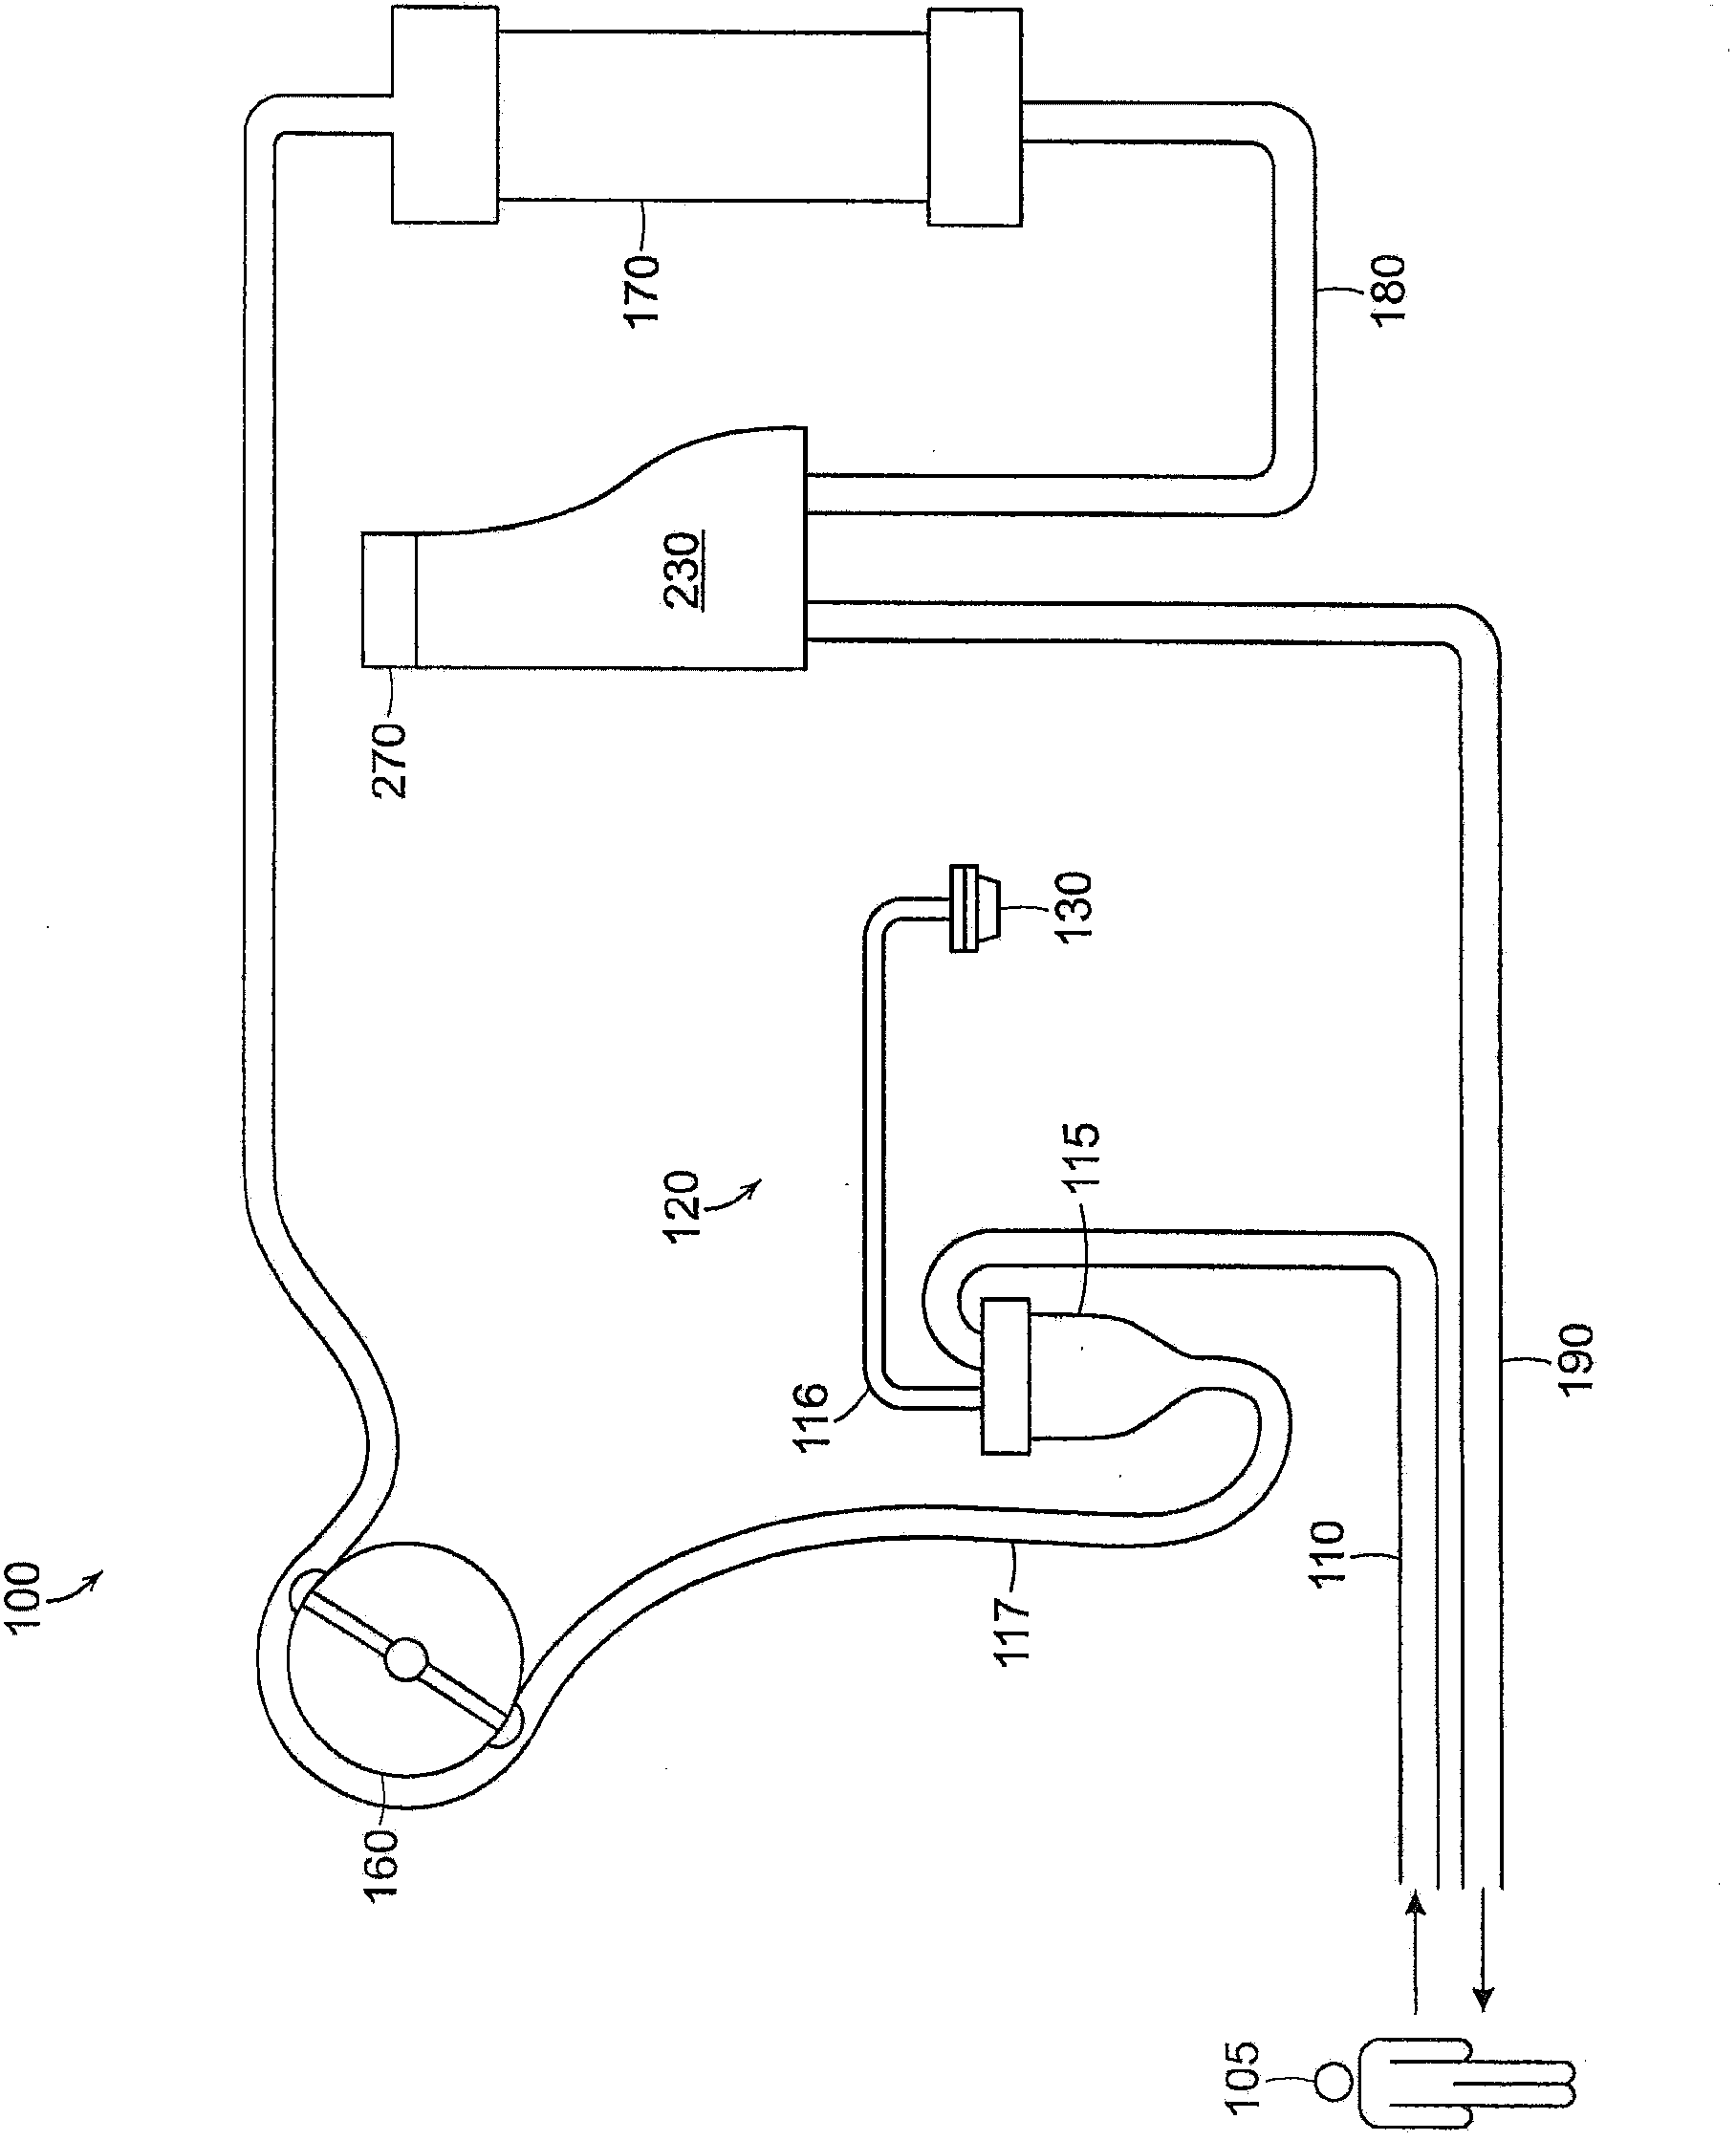 Apparatus and method for venting gas from a liquid